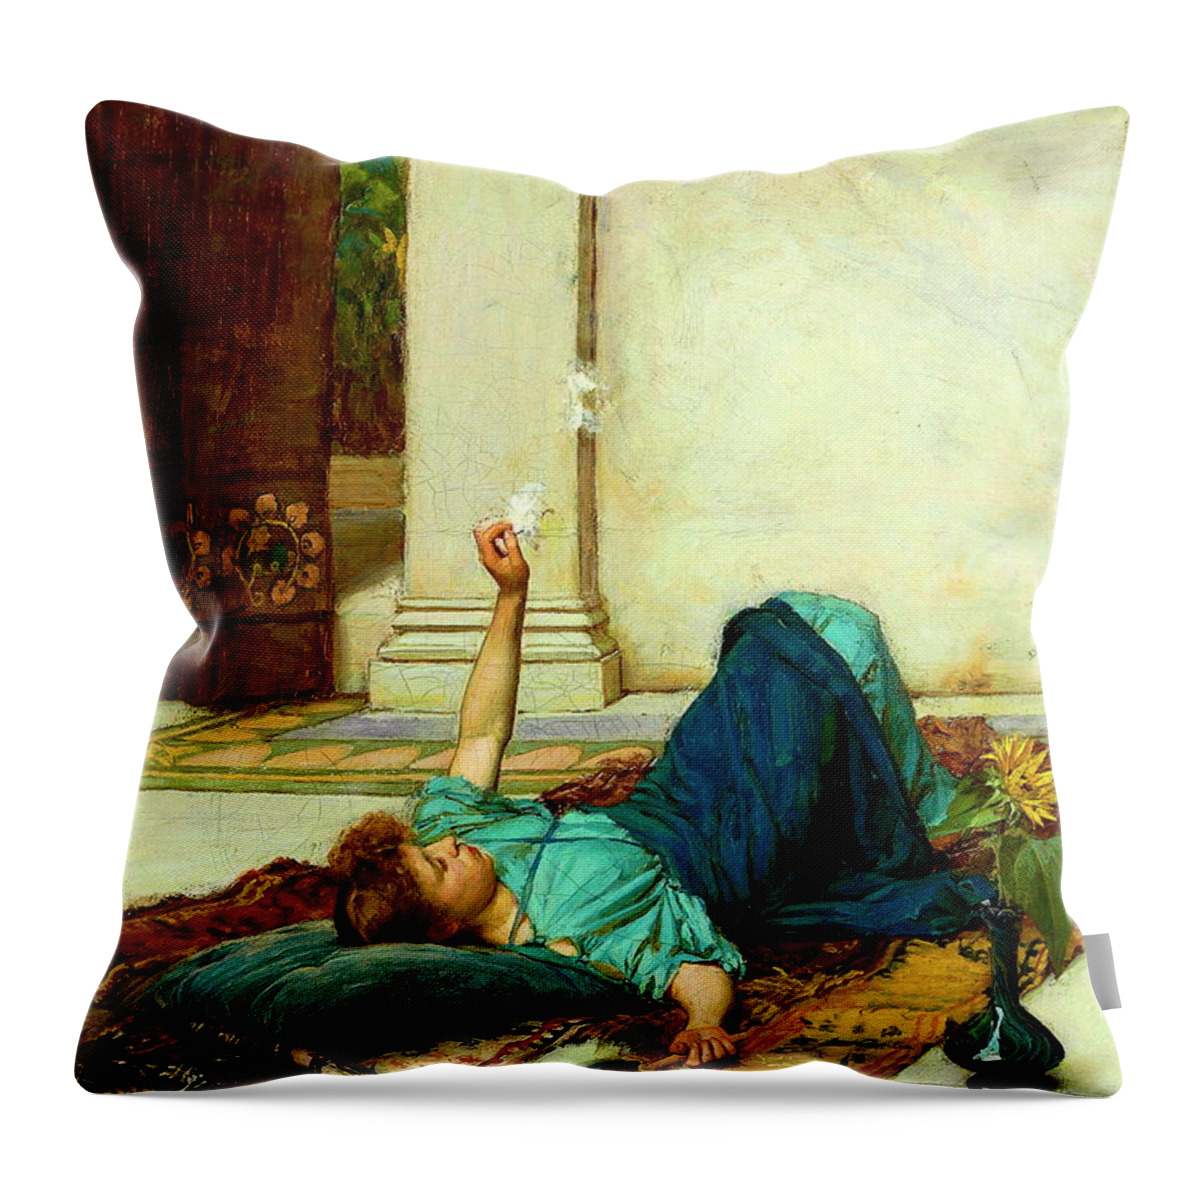 Dolce Far Niente Throw Pillow featuring the painting Dolce Far Niente by John William Waterhouse